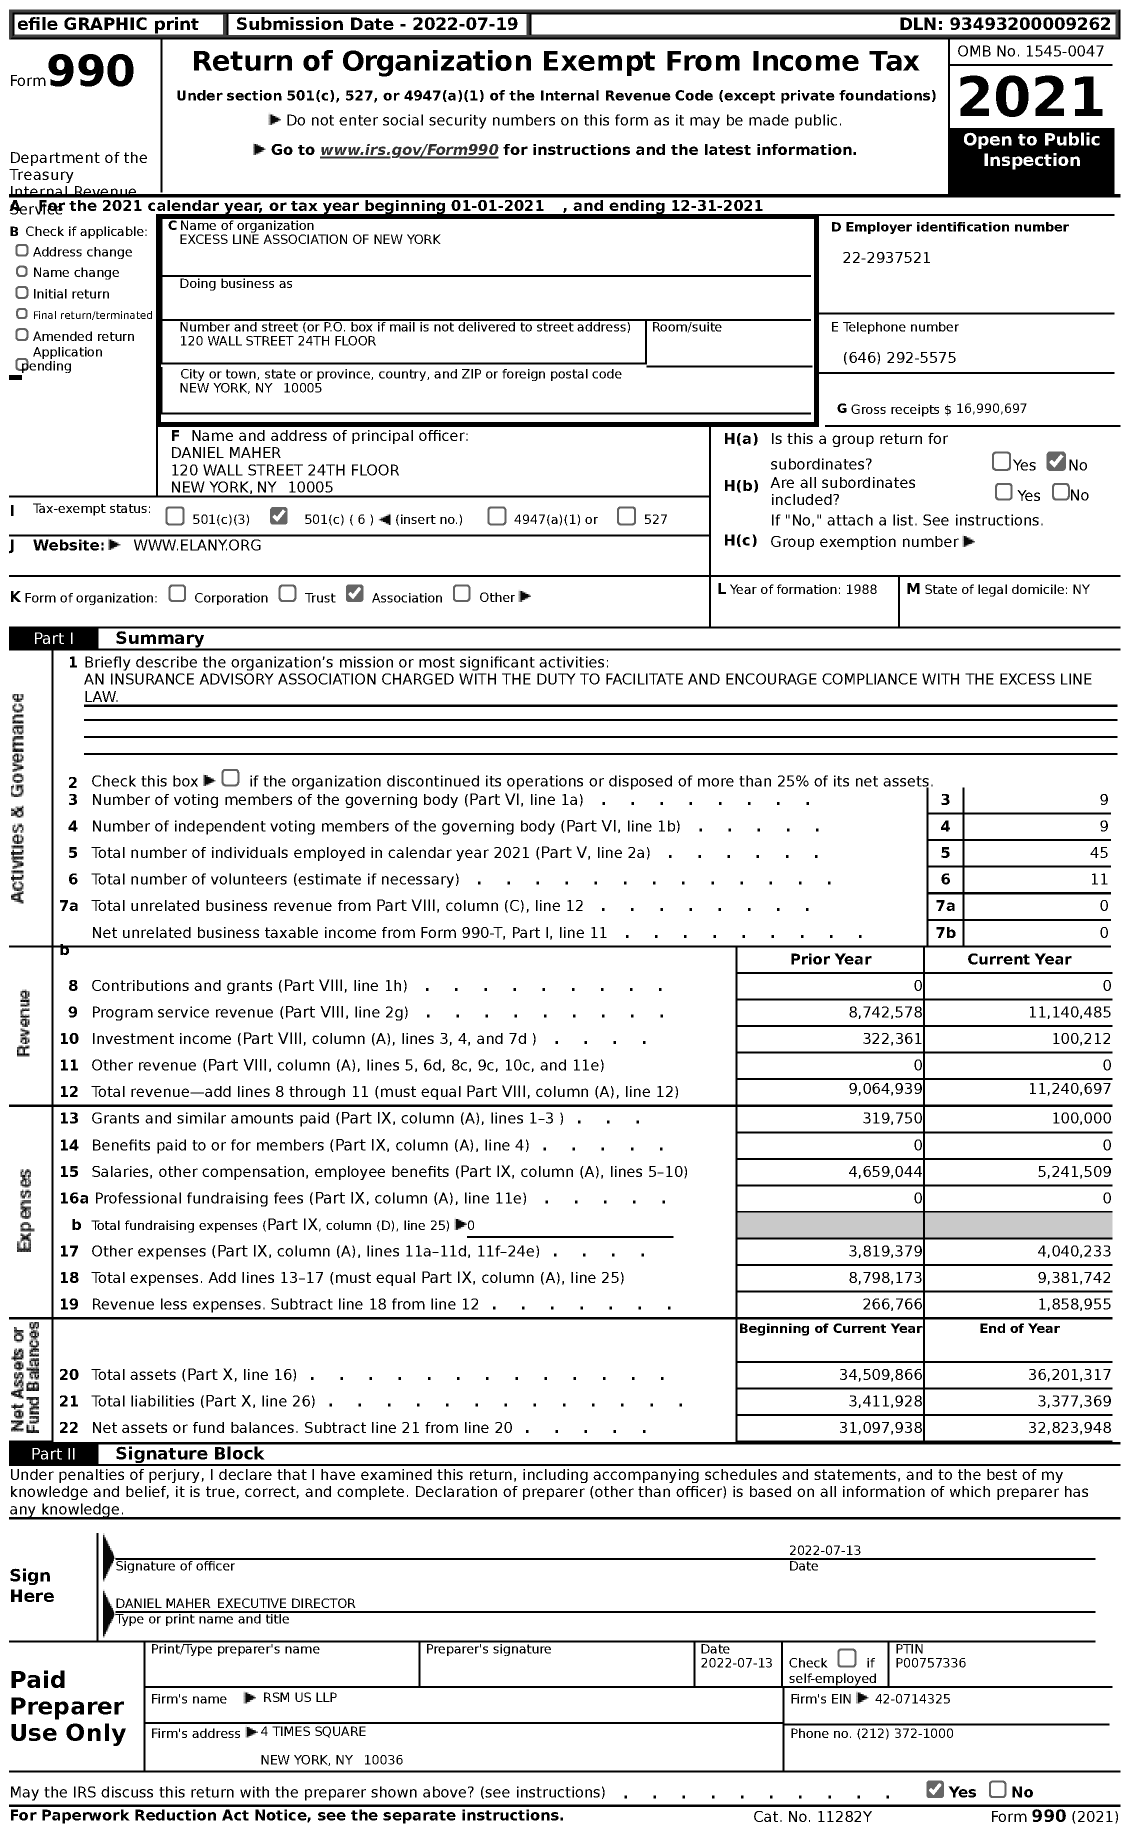 Image of first page of 2021 Form 990 for Excess Line Association of New York